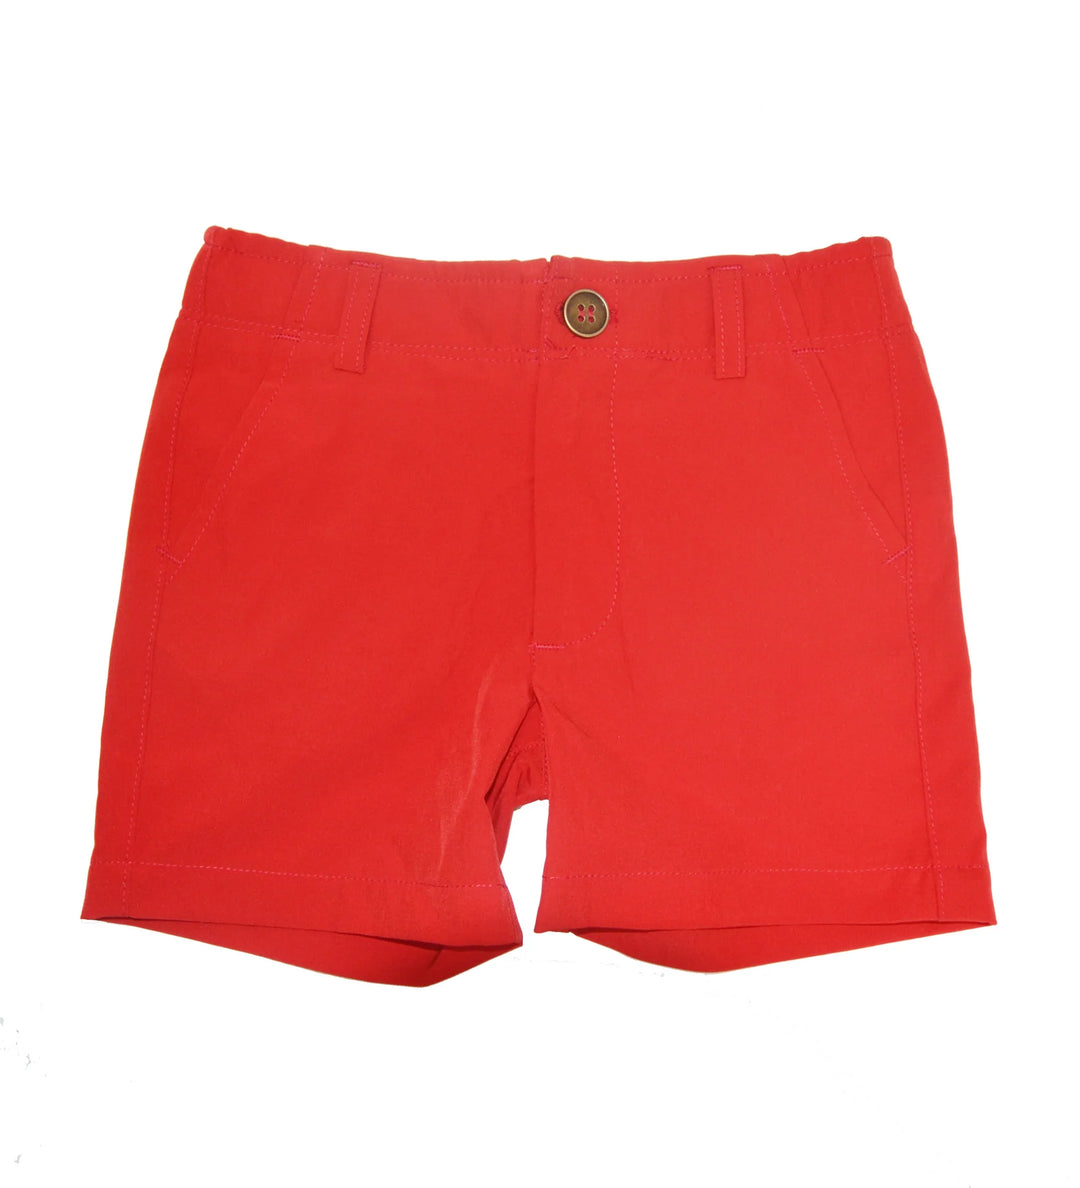 Bald Head Blued Performance Shorts in Red